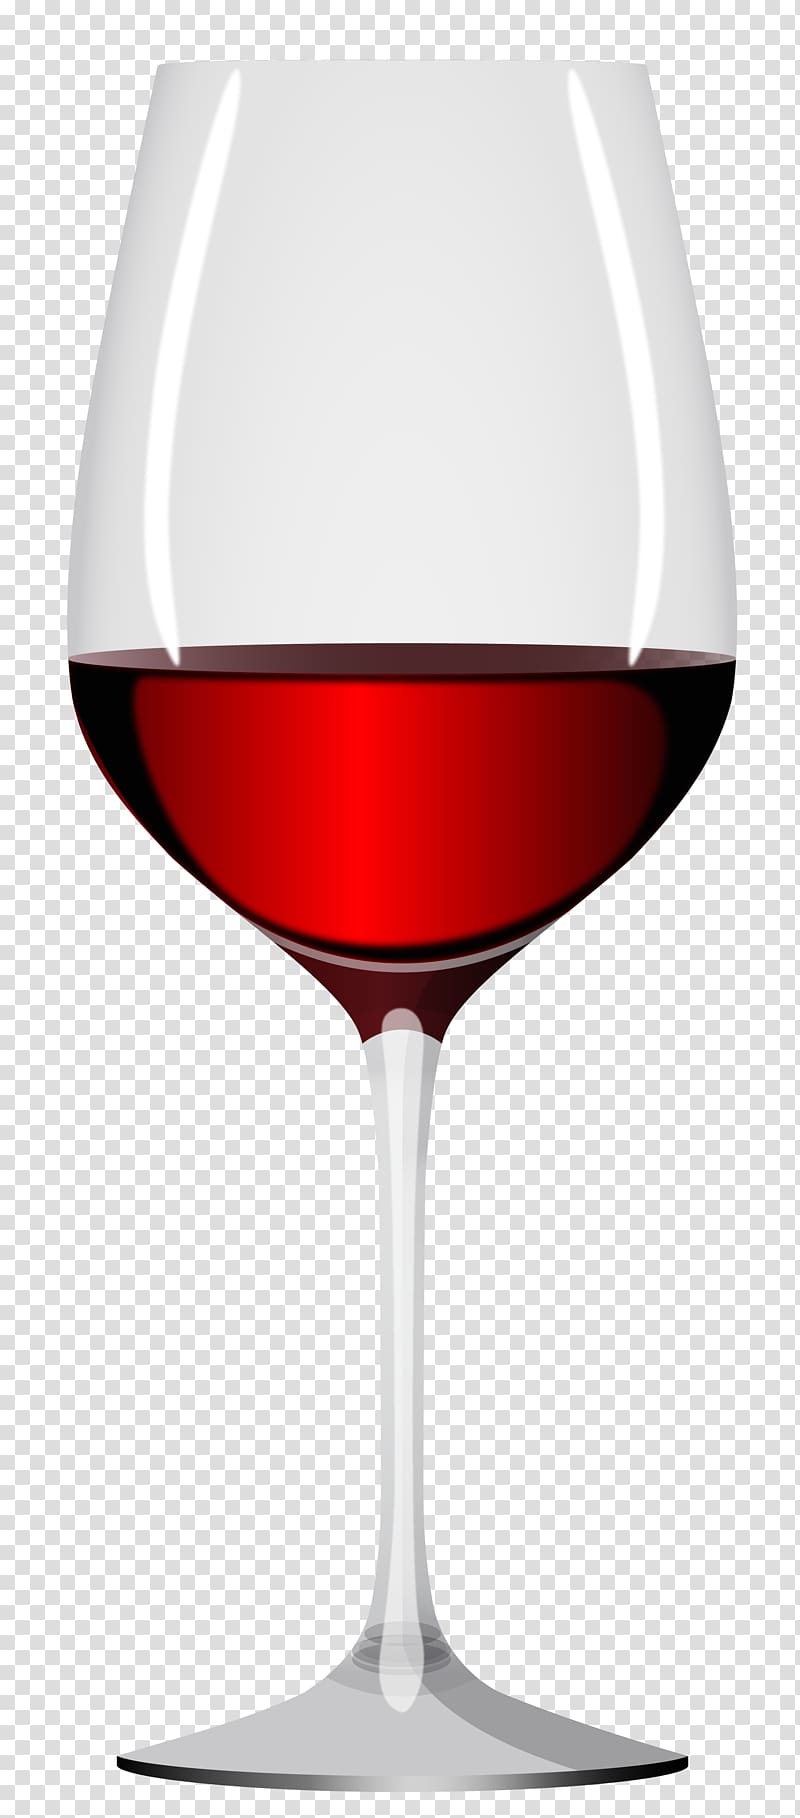 red filled wine glass illustration, Red Wine Champagne Wine glass , Glass of Red Wine transparent background PNG clipart